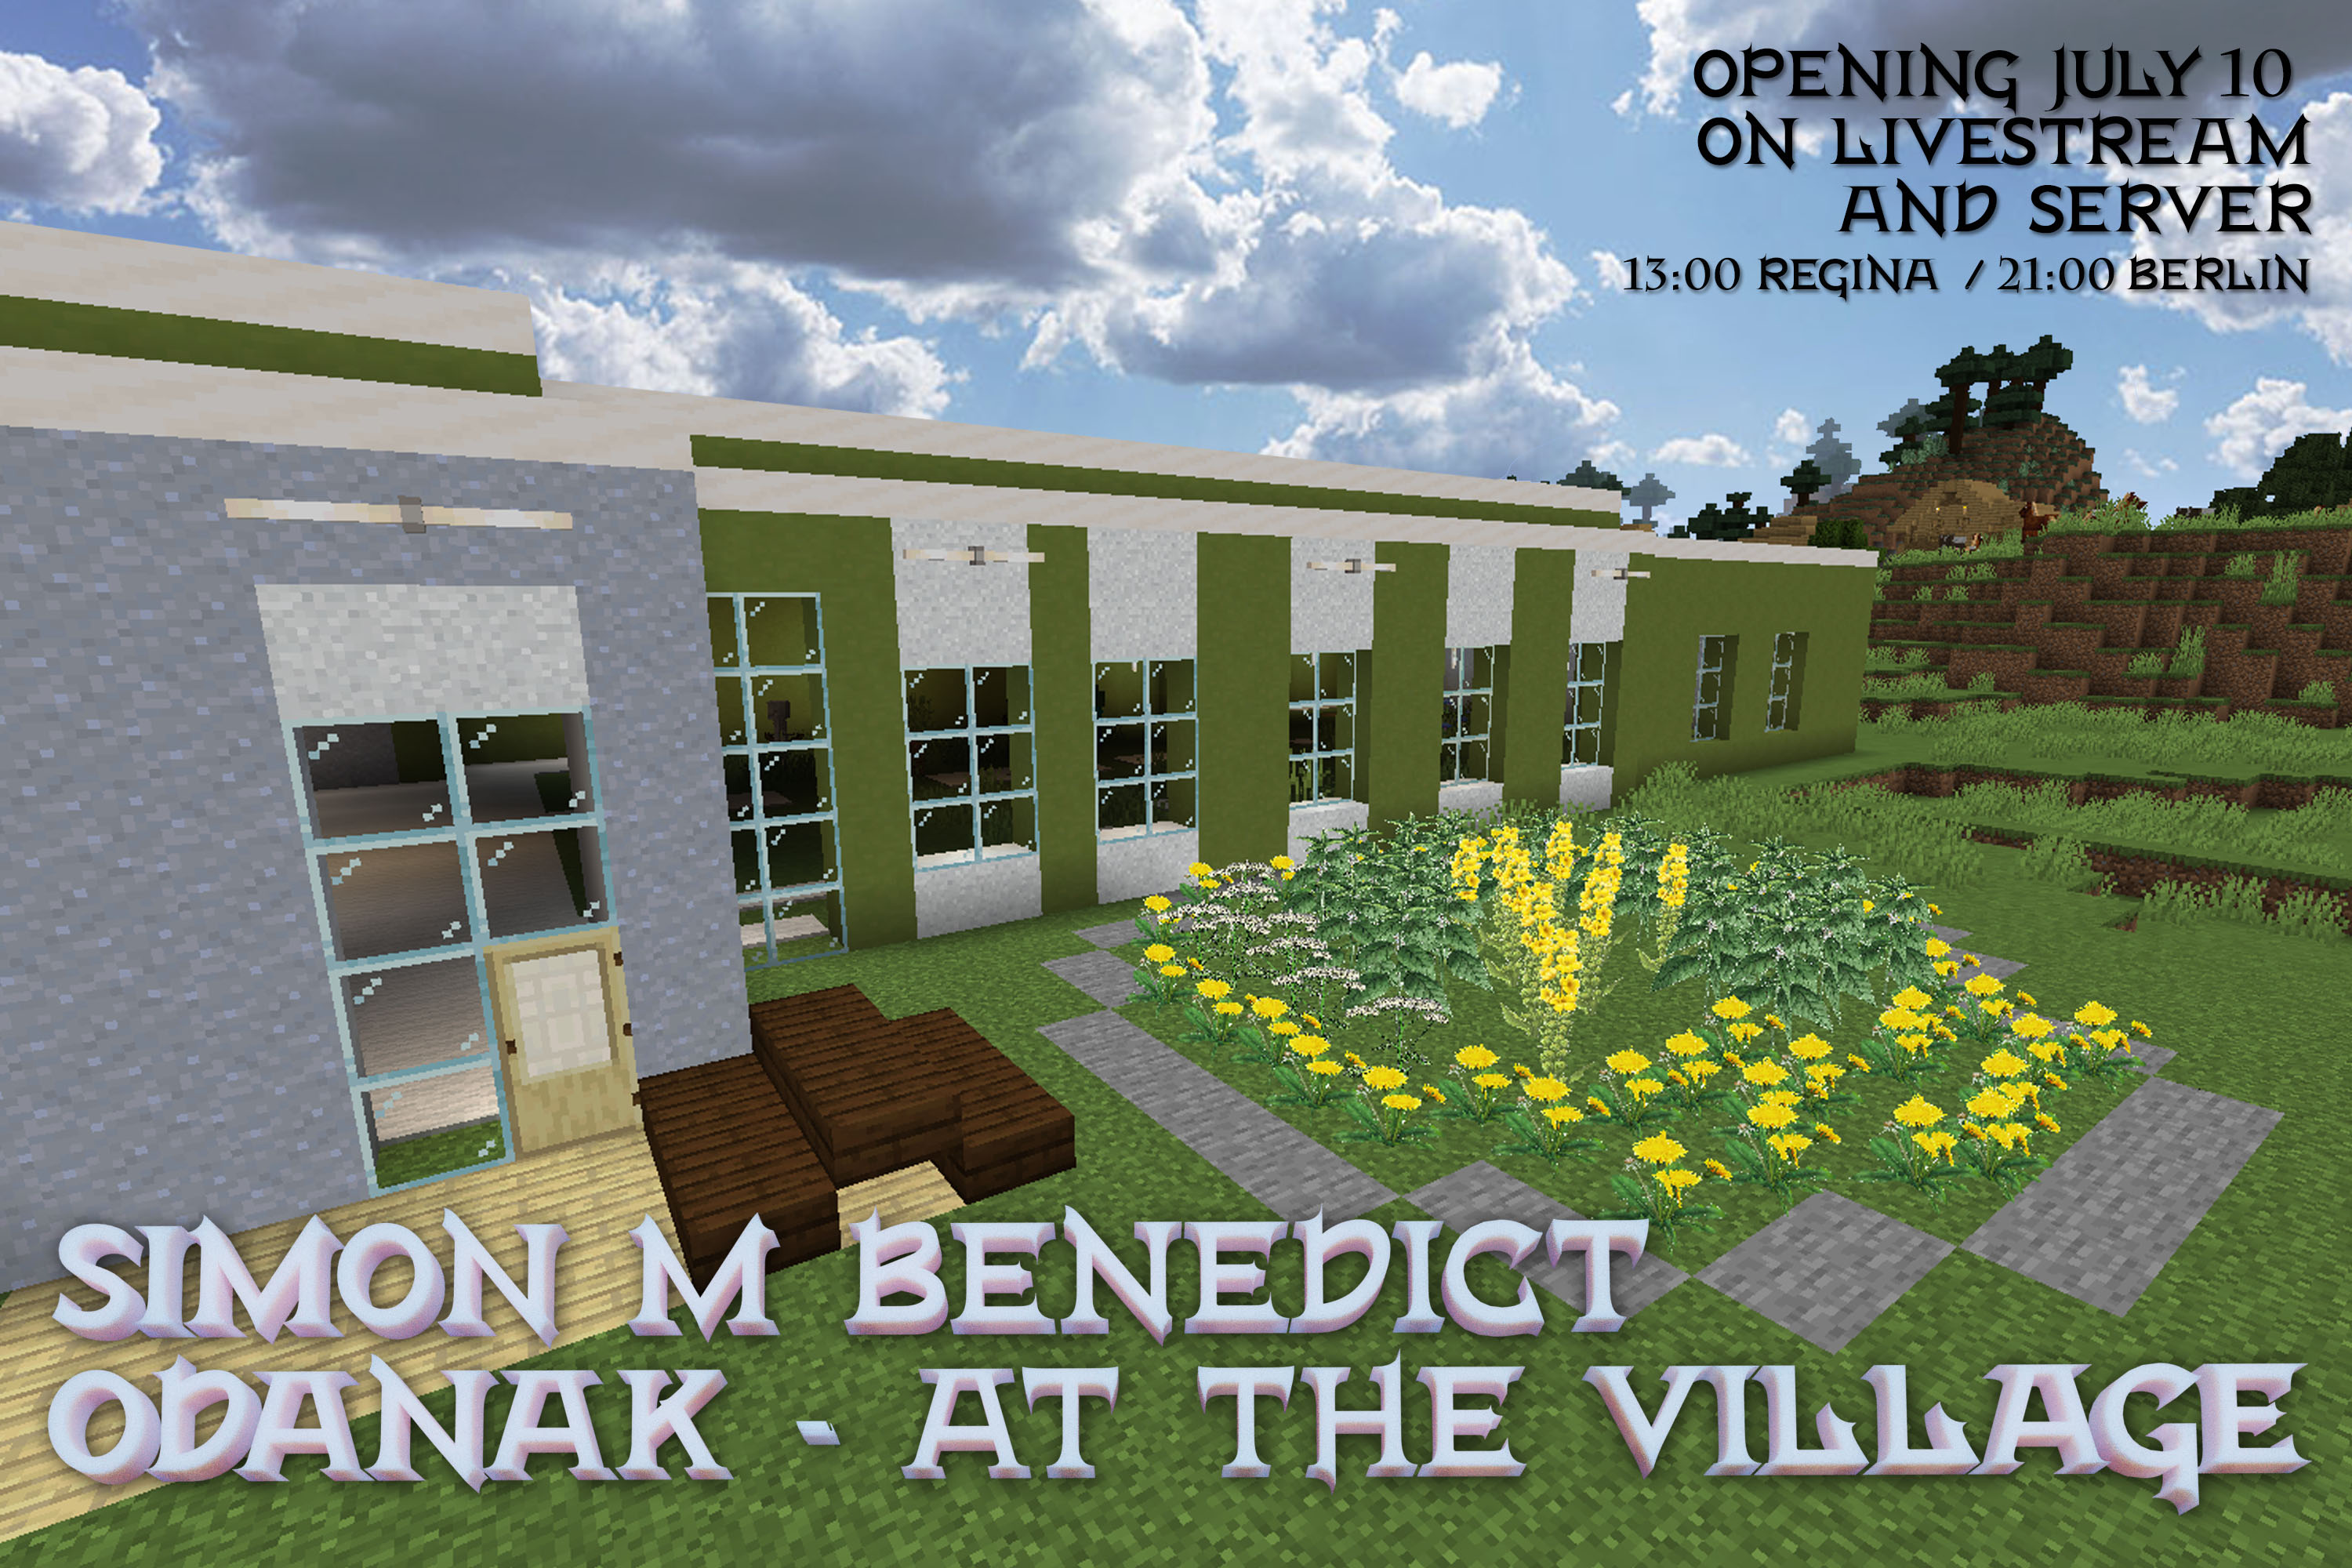 Flyer for the Odanak - At the Village opening, showing the health center of the community, and the medicinal plants that have been added to the game